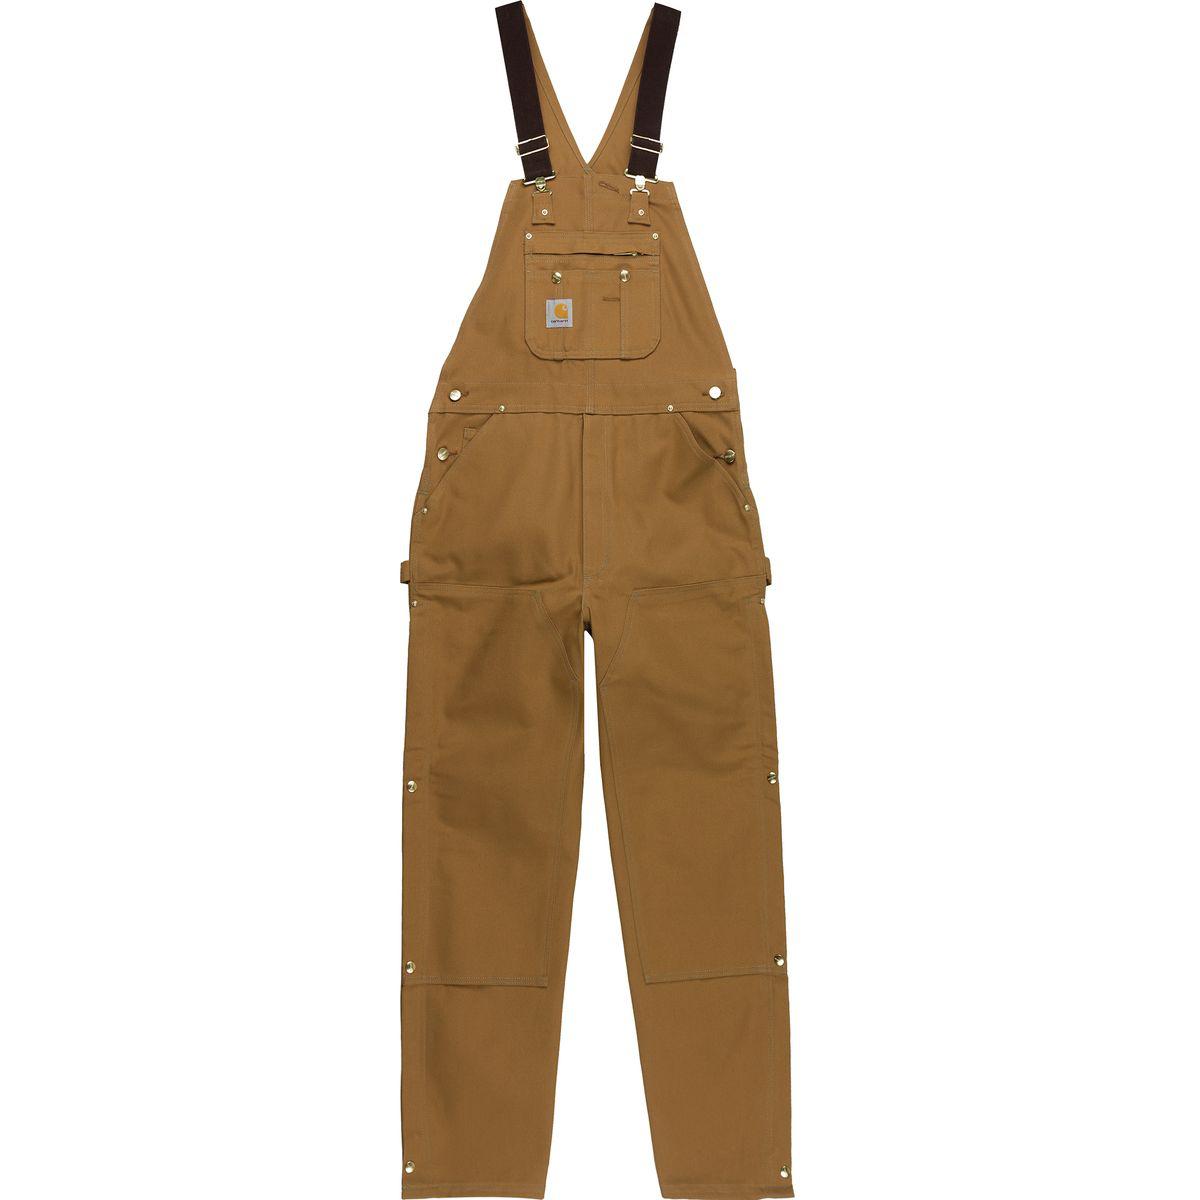 Carhartt Canvas Zip-to-thigh Bib Overalls in Brown for Men - Lyst